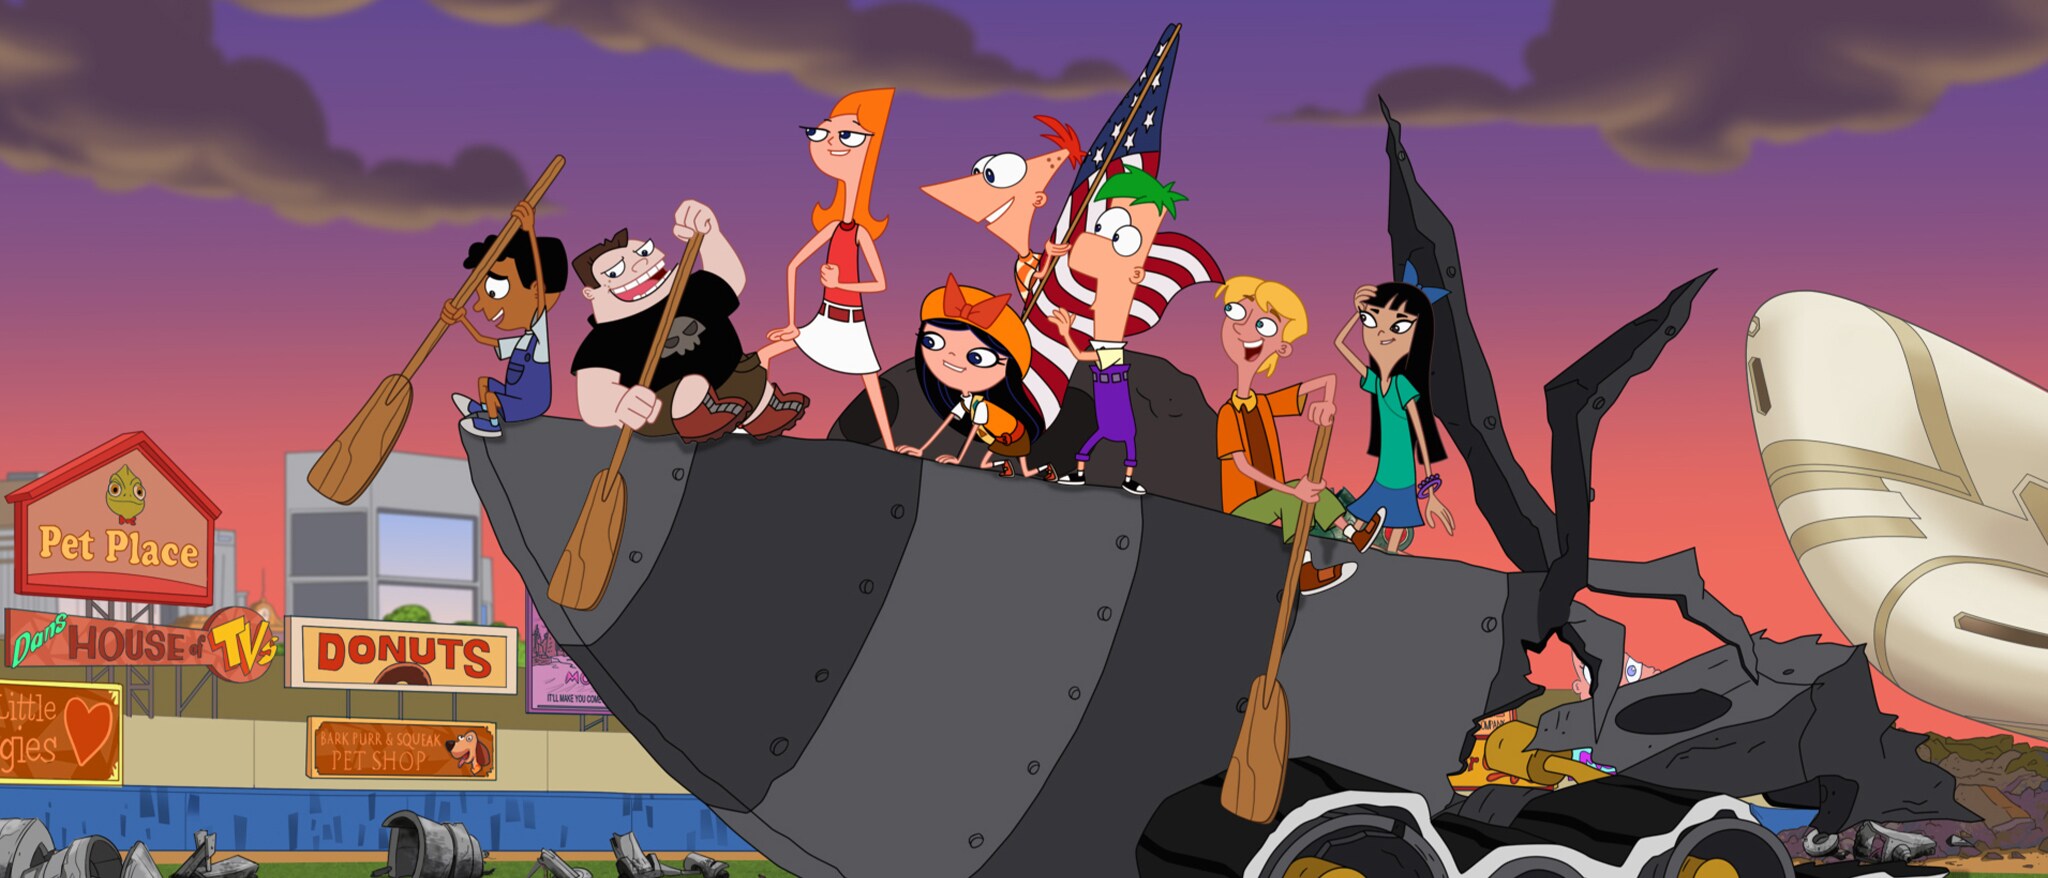 Phineas and Ferb The Movie: Candace Against the Universe - Featured Content Banner